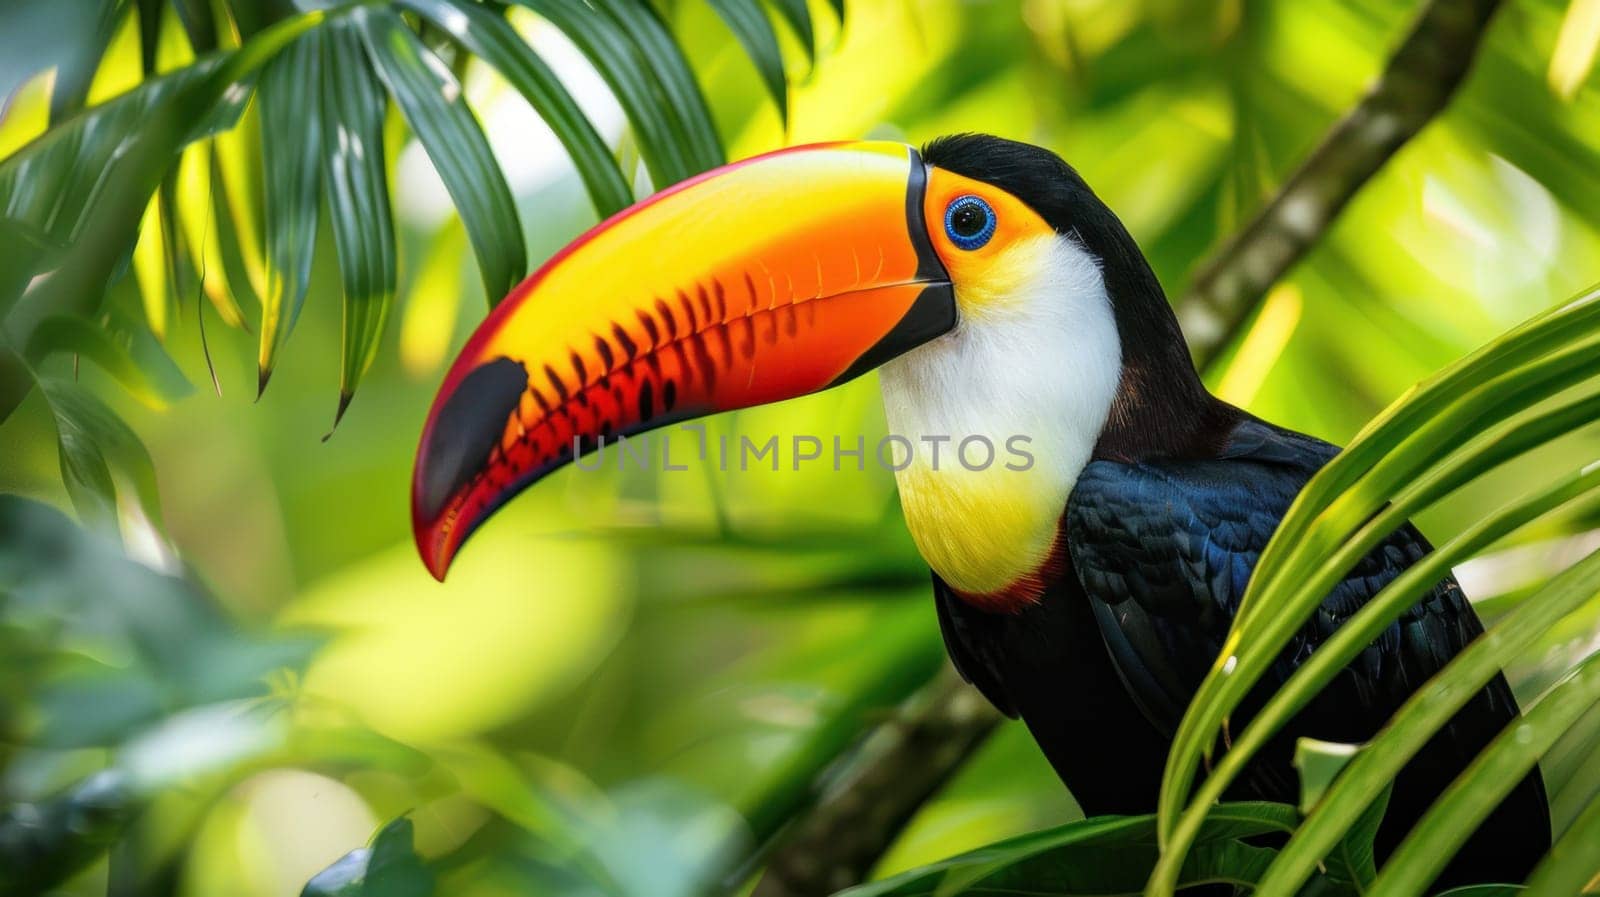 A close-up image of a colorful toucan perched among tropical foliage, its vibrant plumage and distinctive beak adding a burst of energy to the lush greenery of its natural habitat..